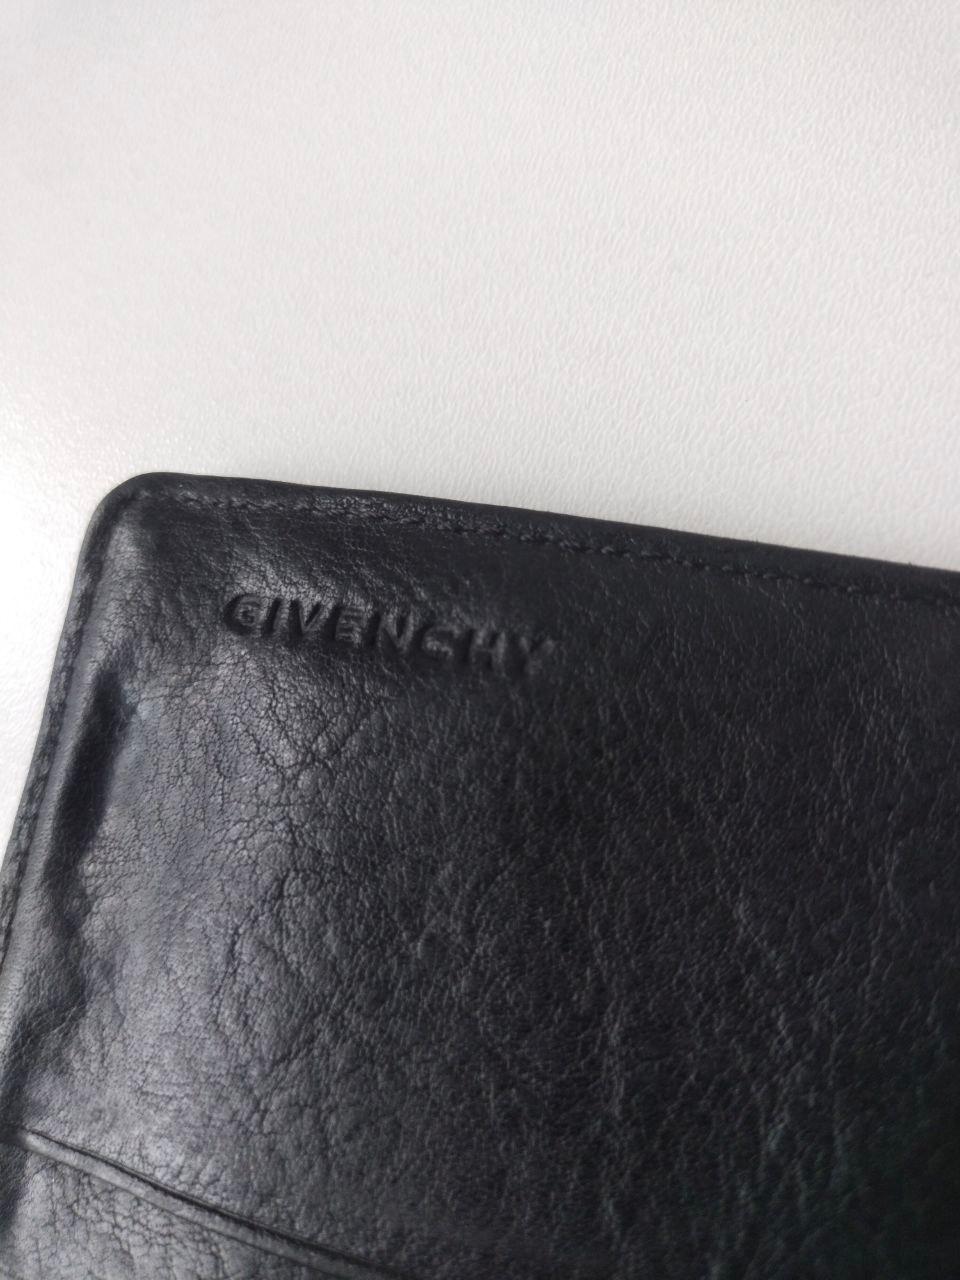 Givenchy Monogram Canvas / Leather Wallet 3